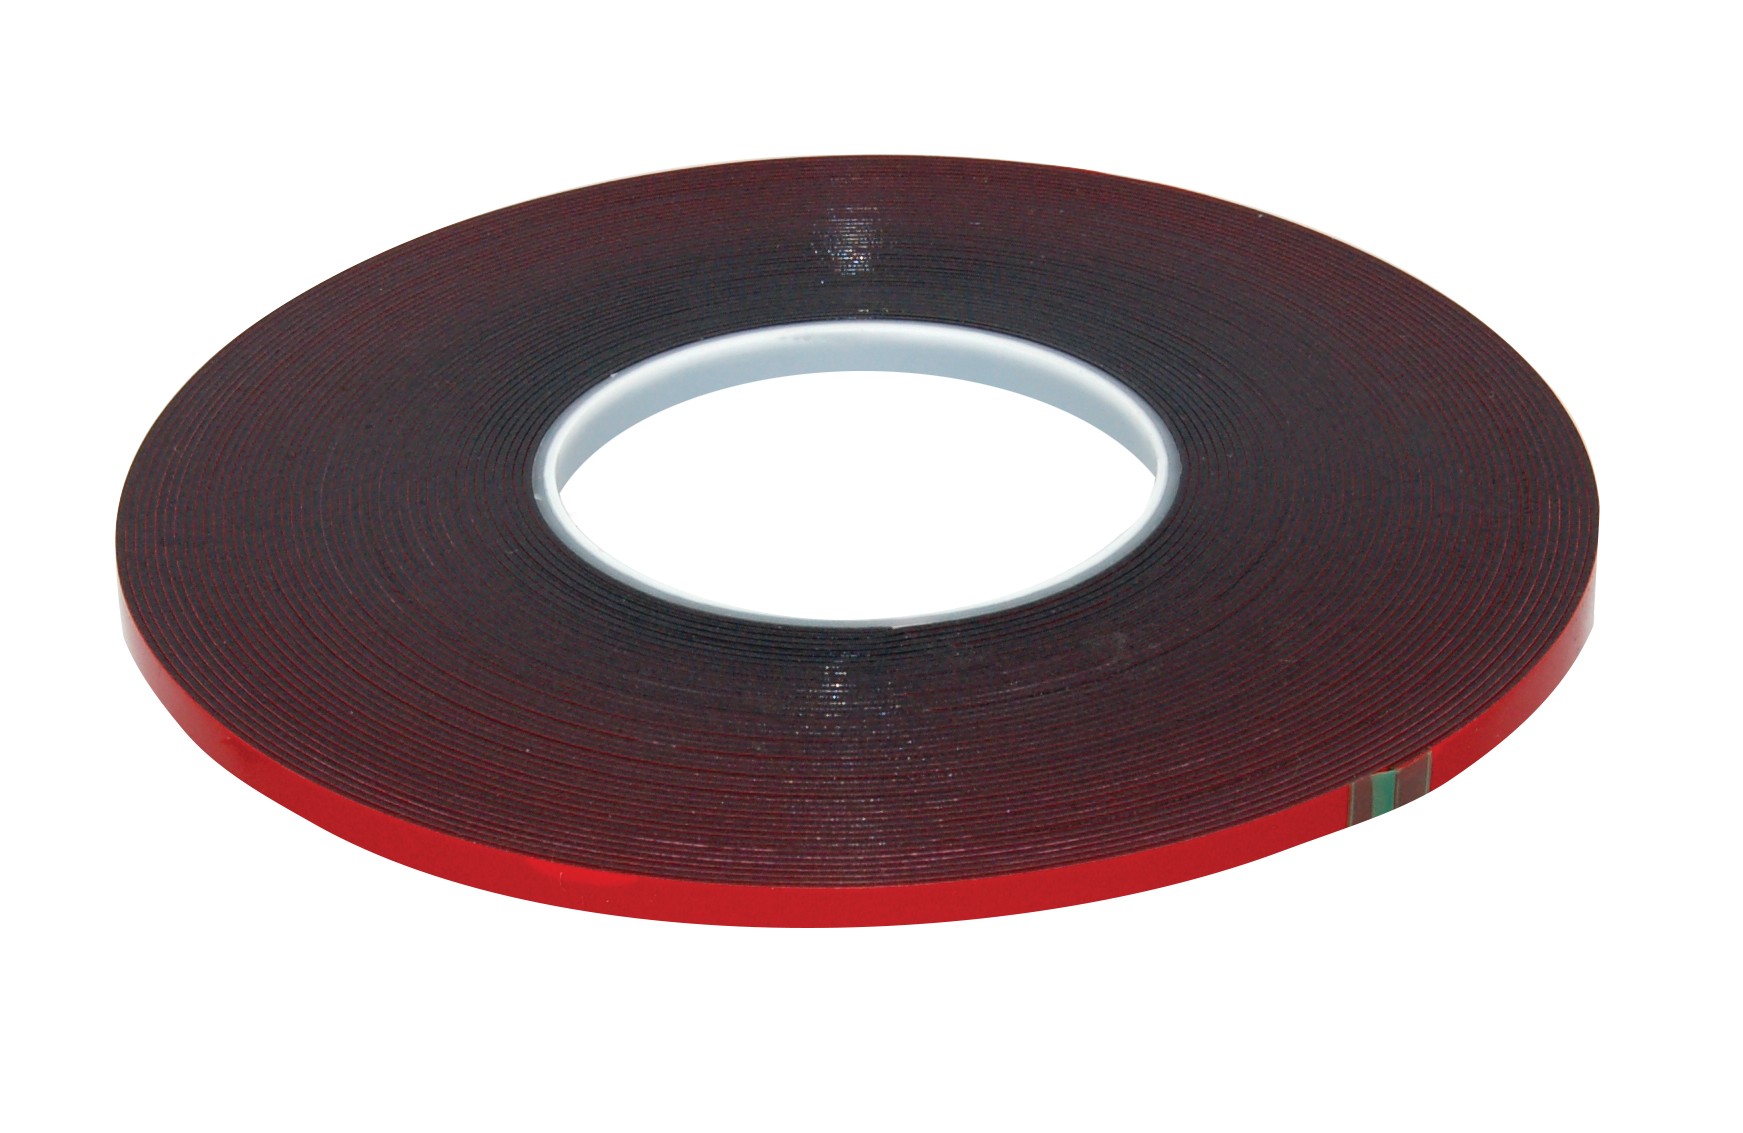 High Performance Double Faced Acrylic Foam Tape - 1/4" x 60' x 45 mil - Red Liner